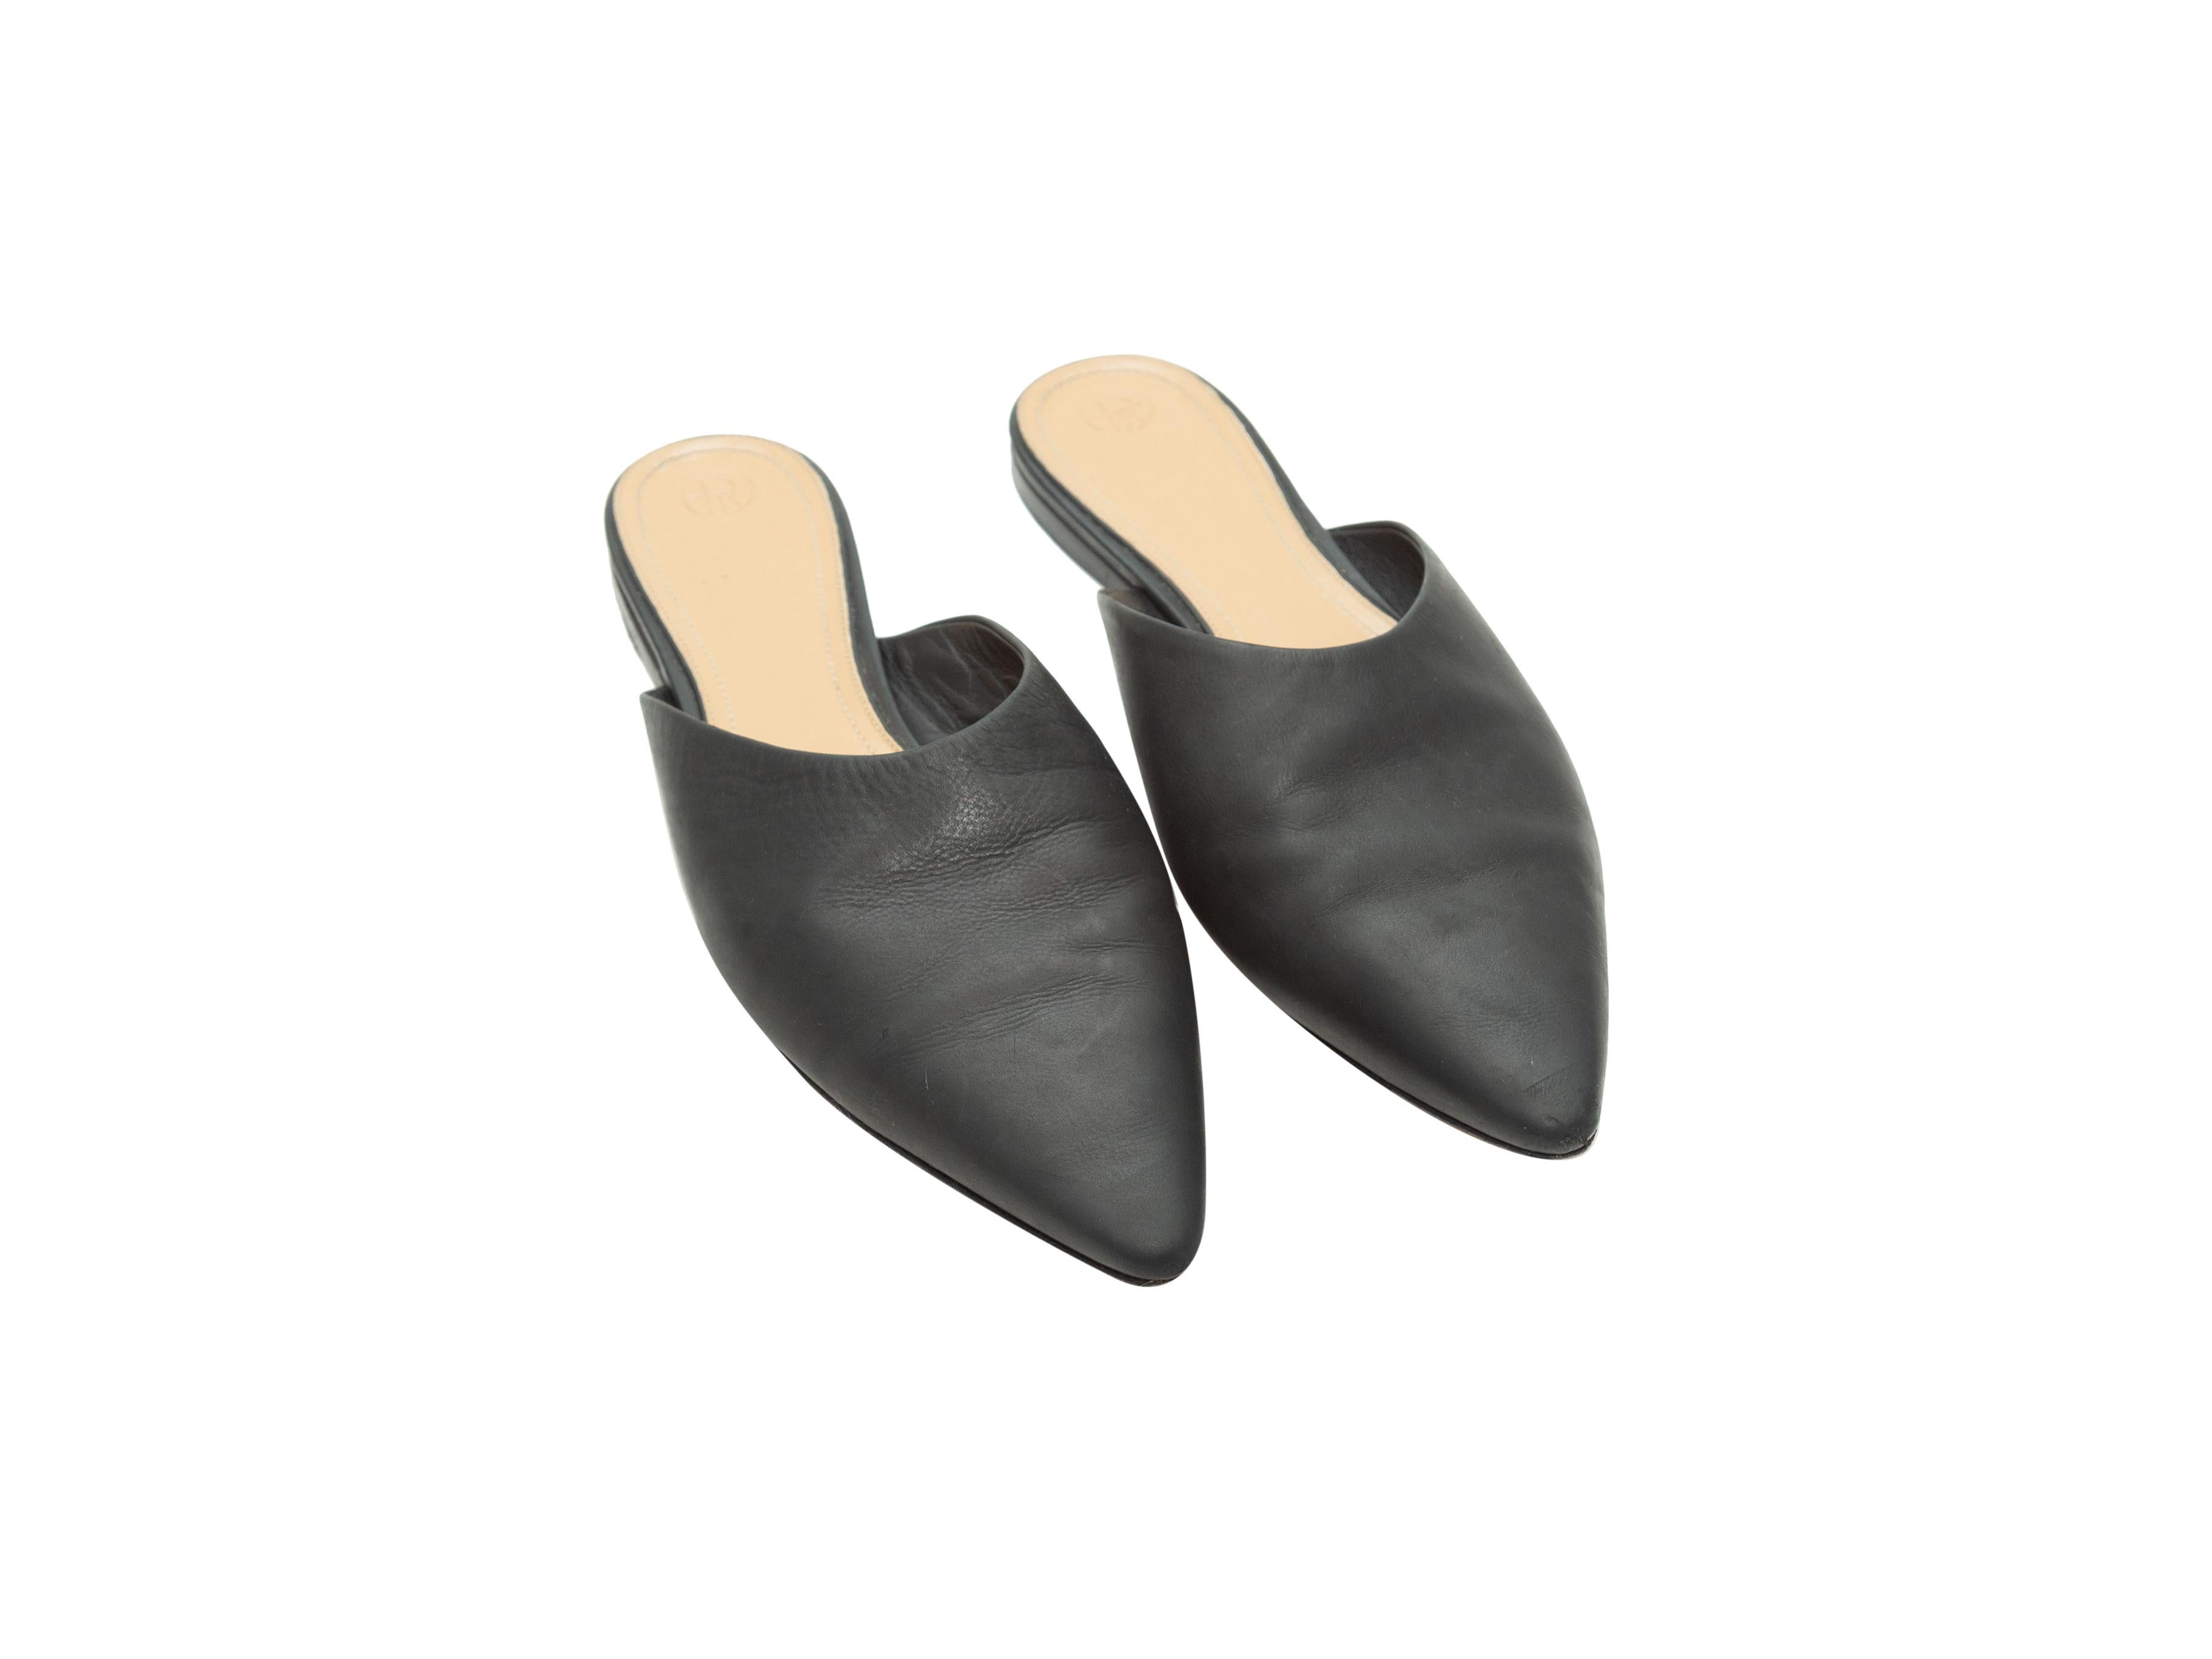 Product details: Black pointed-toe leather mules by The Row. Designer size 38.5.
Condition: Pre-owned. Very good. Scuffing at soles. Light creasing at leather.
Est. Retail $ 995.00